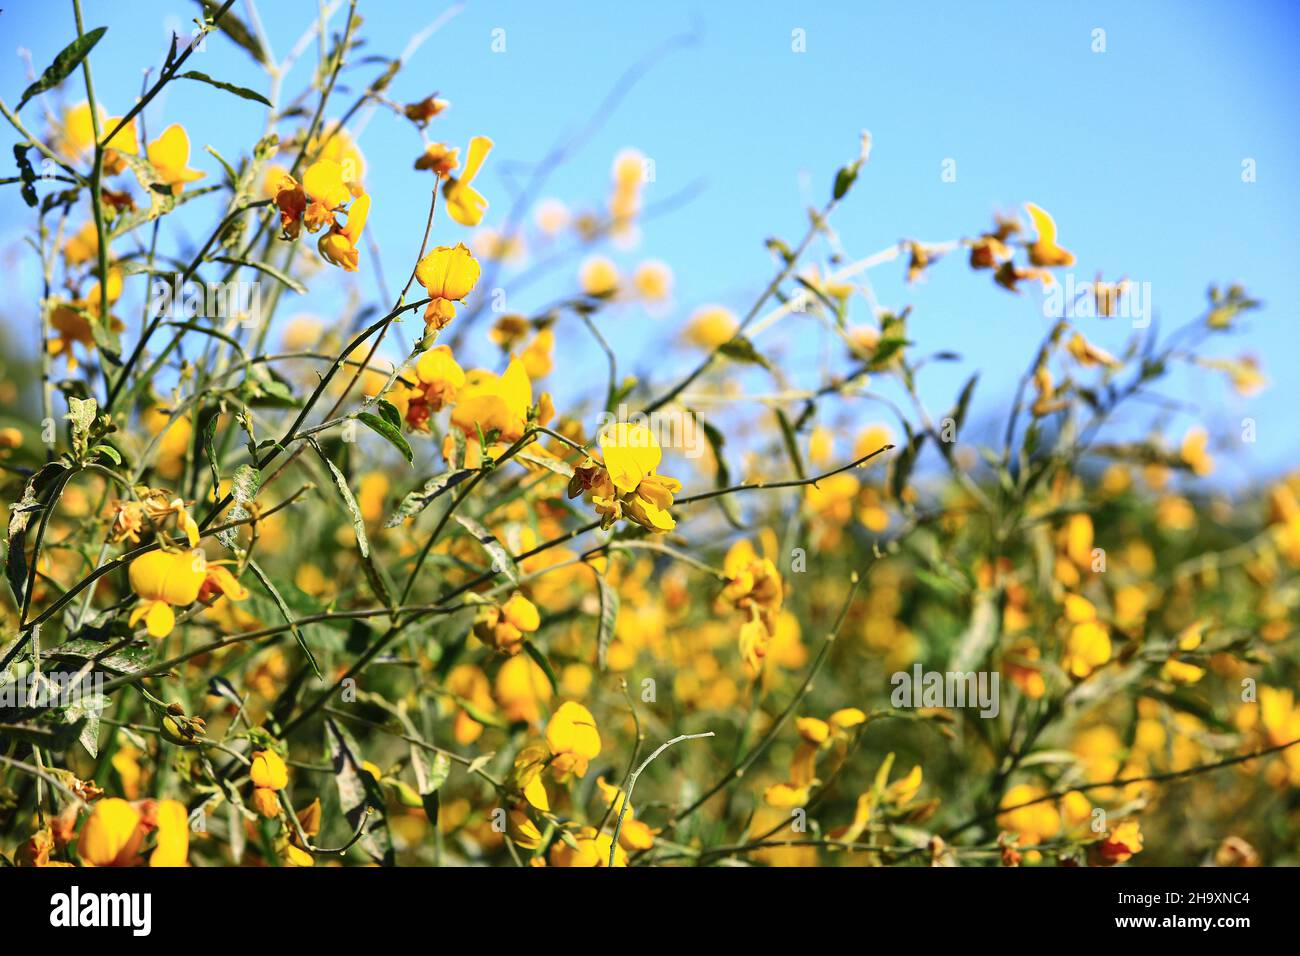 beautiful blooming flowers of Sun Hemp,close-up of yellow flowers blooming on the field at a sunny day Stock Photo